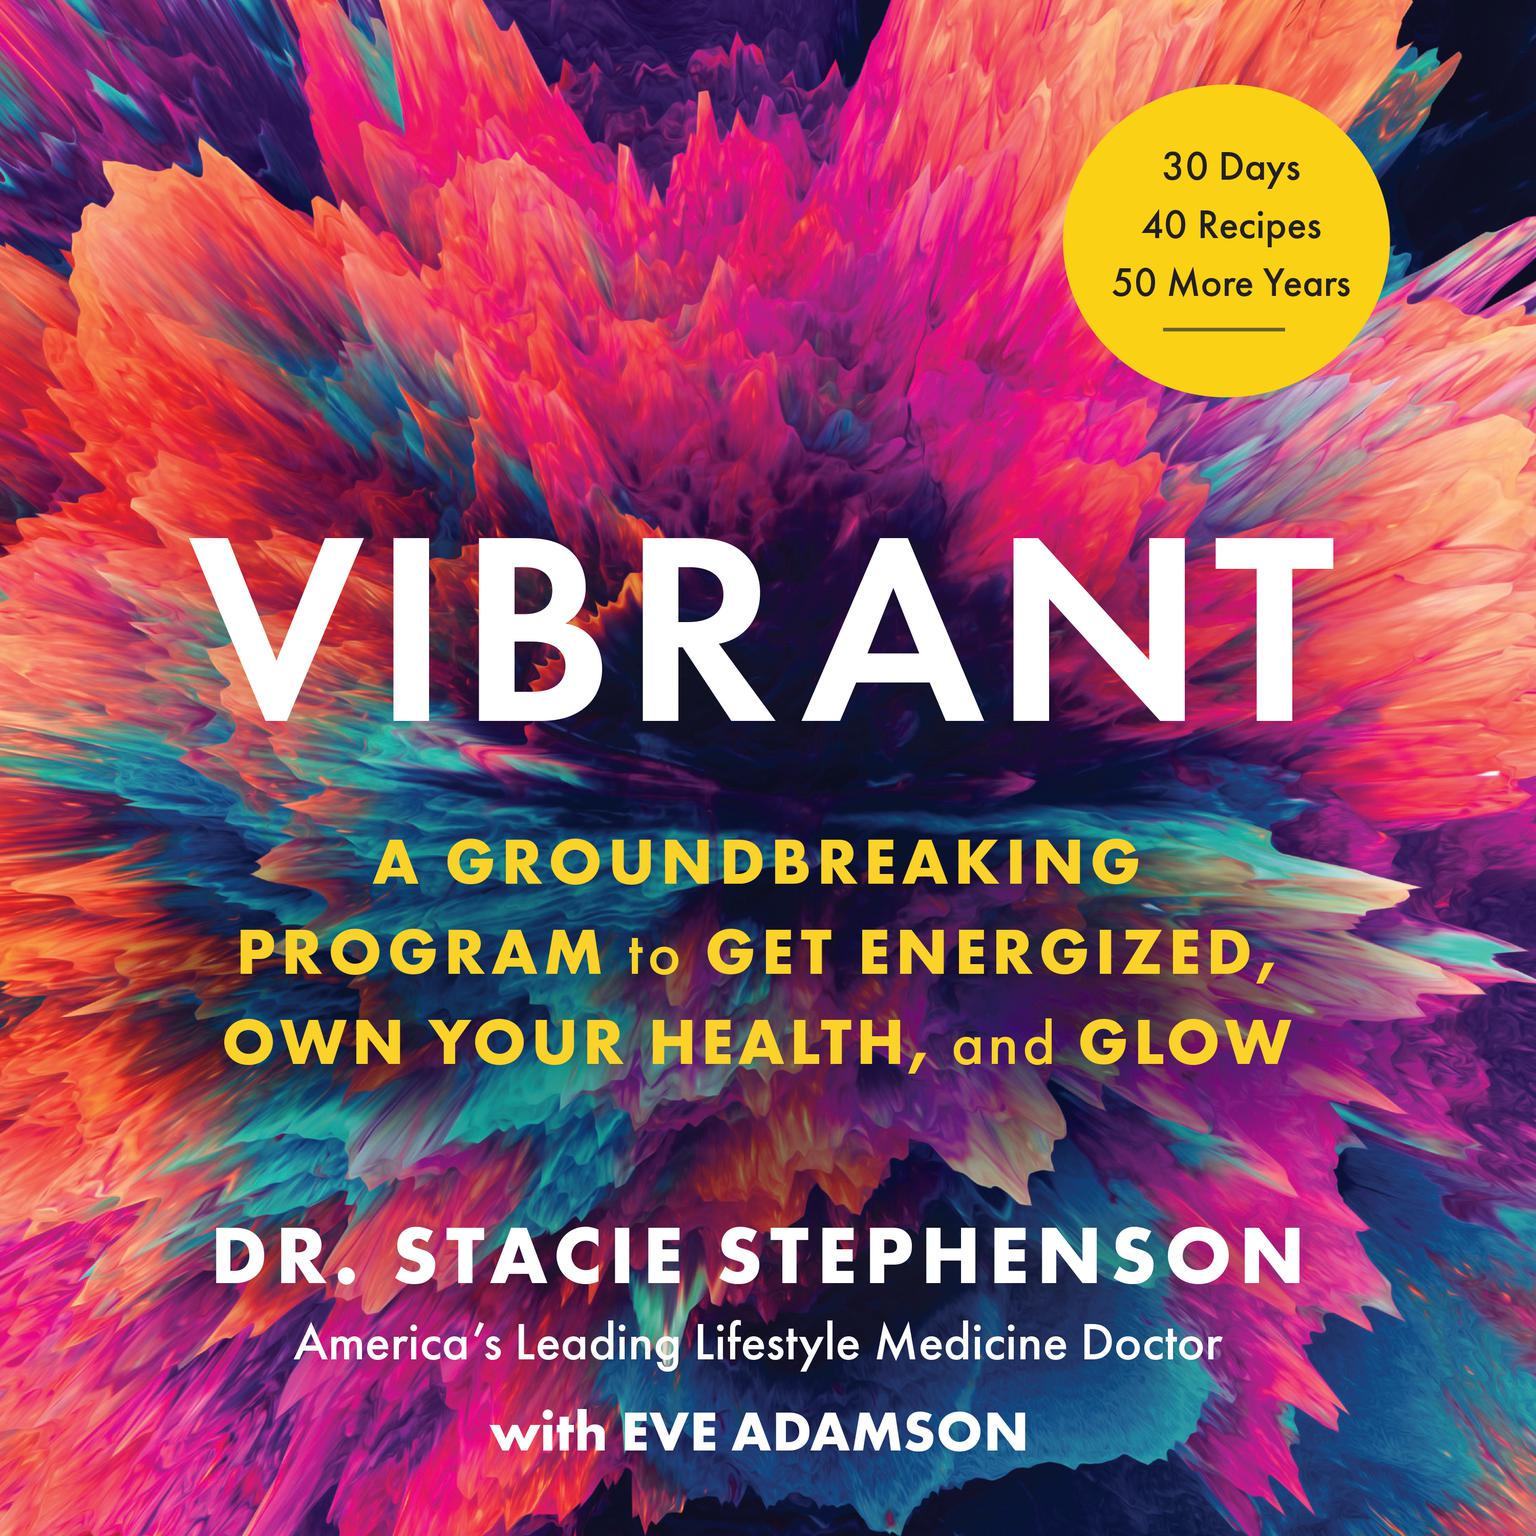 Vibrant: A Groundbreaking Program to Get Energized, Own Your Health, and Glow Audiobook, by Stacie Stephenson